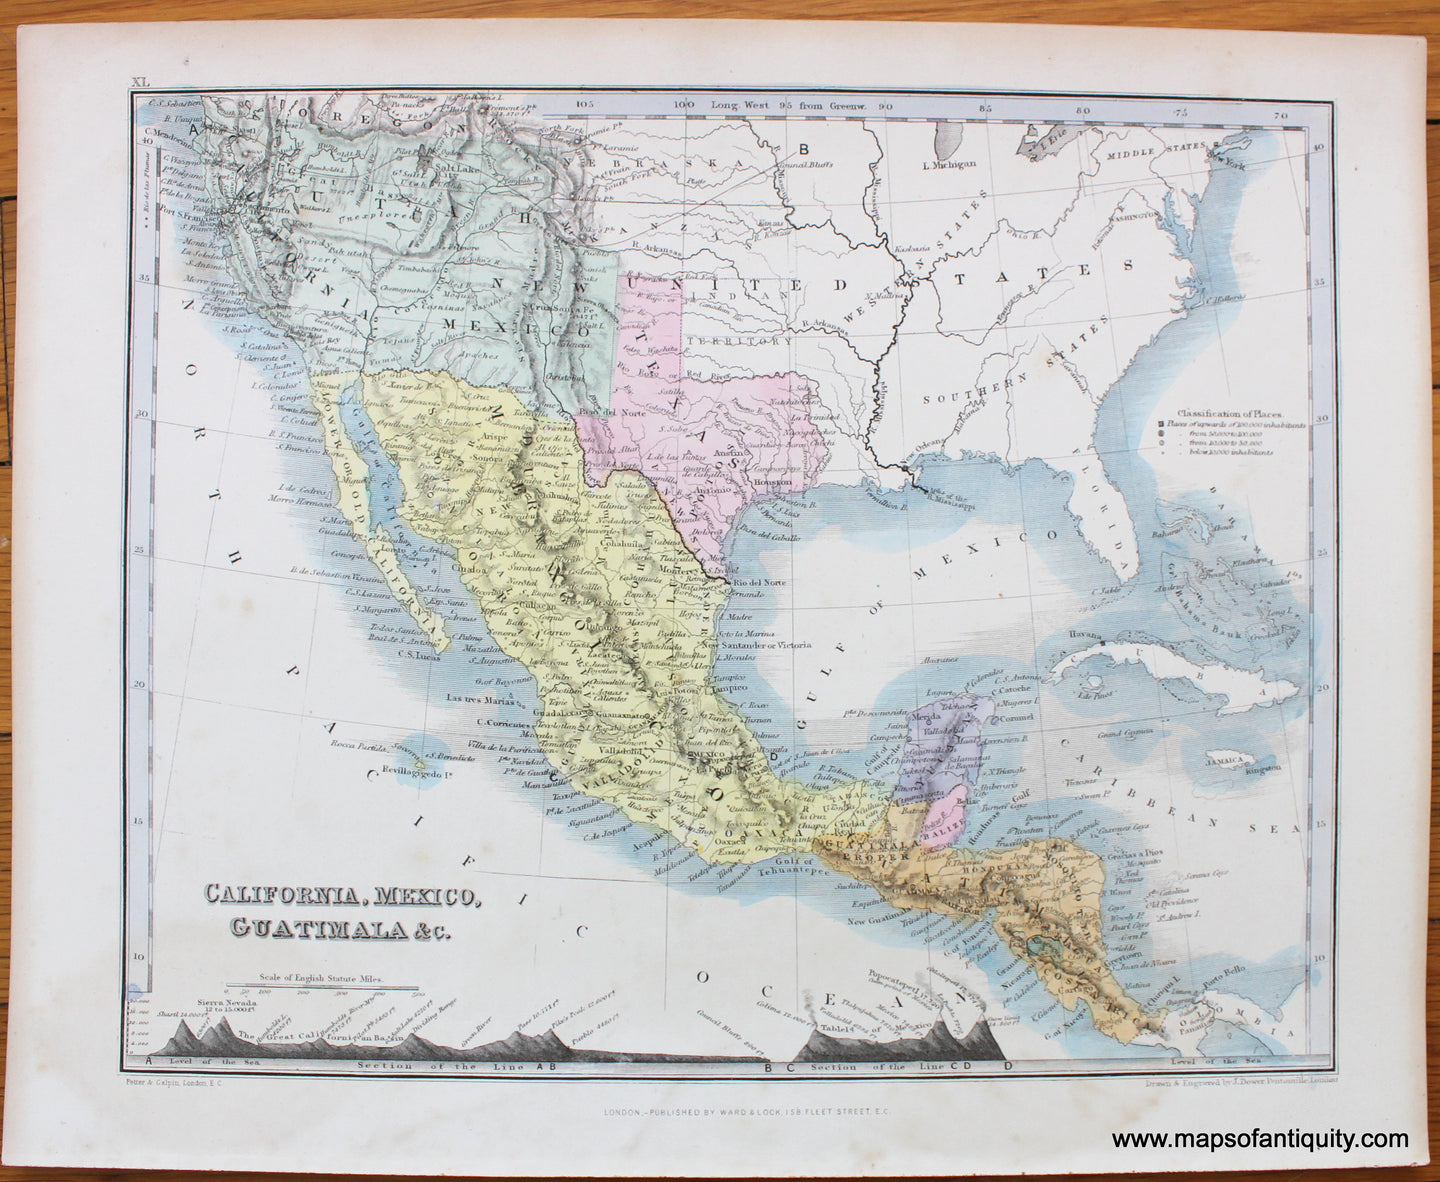 Antique-Hand-Colored-Map-California-Mexico-Guatimala-&c.-c.-1844-Dower-United-States-Mexico-Central-America-1800s-19th-century-Maps-of-Antiquity